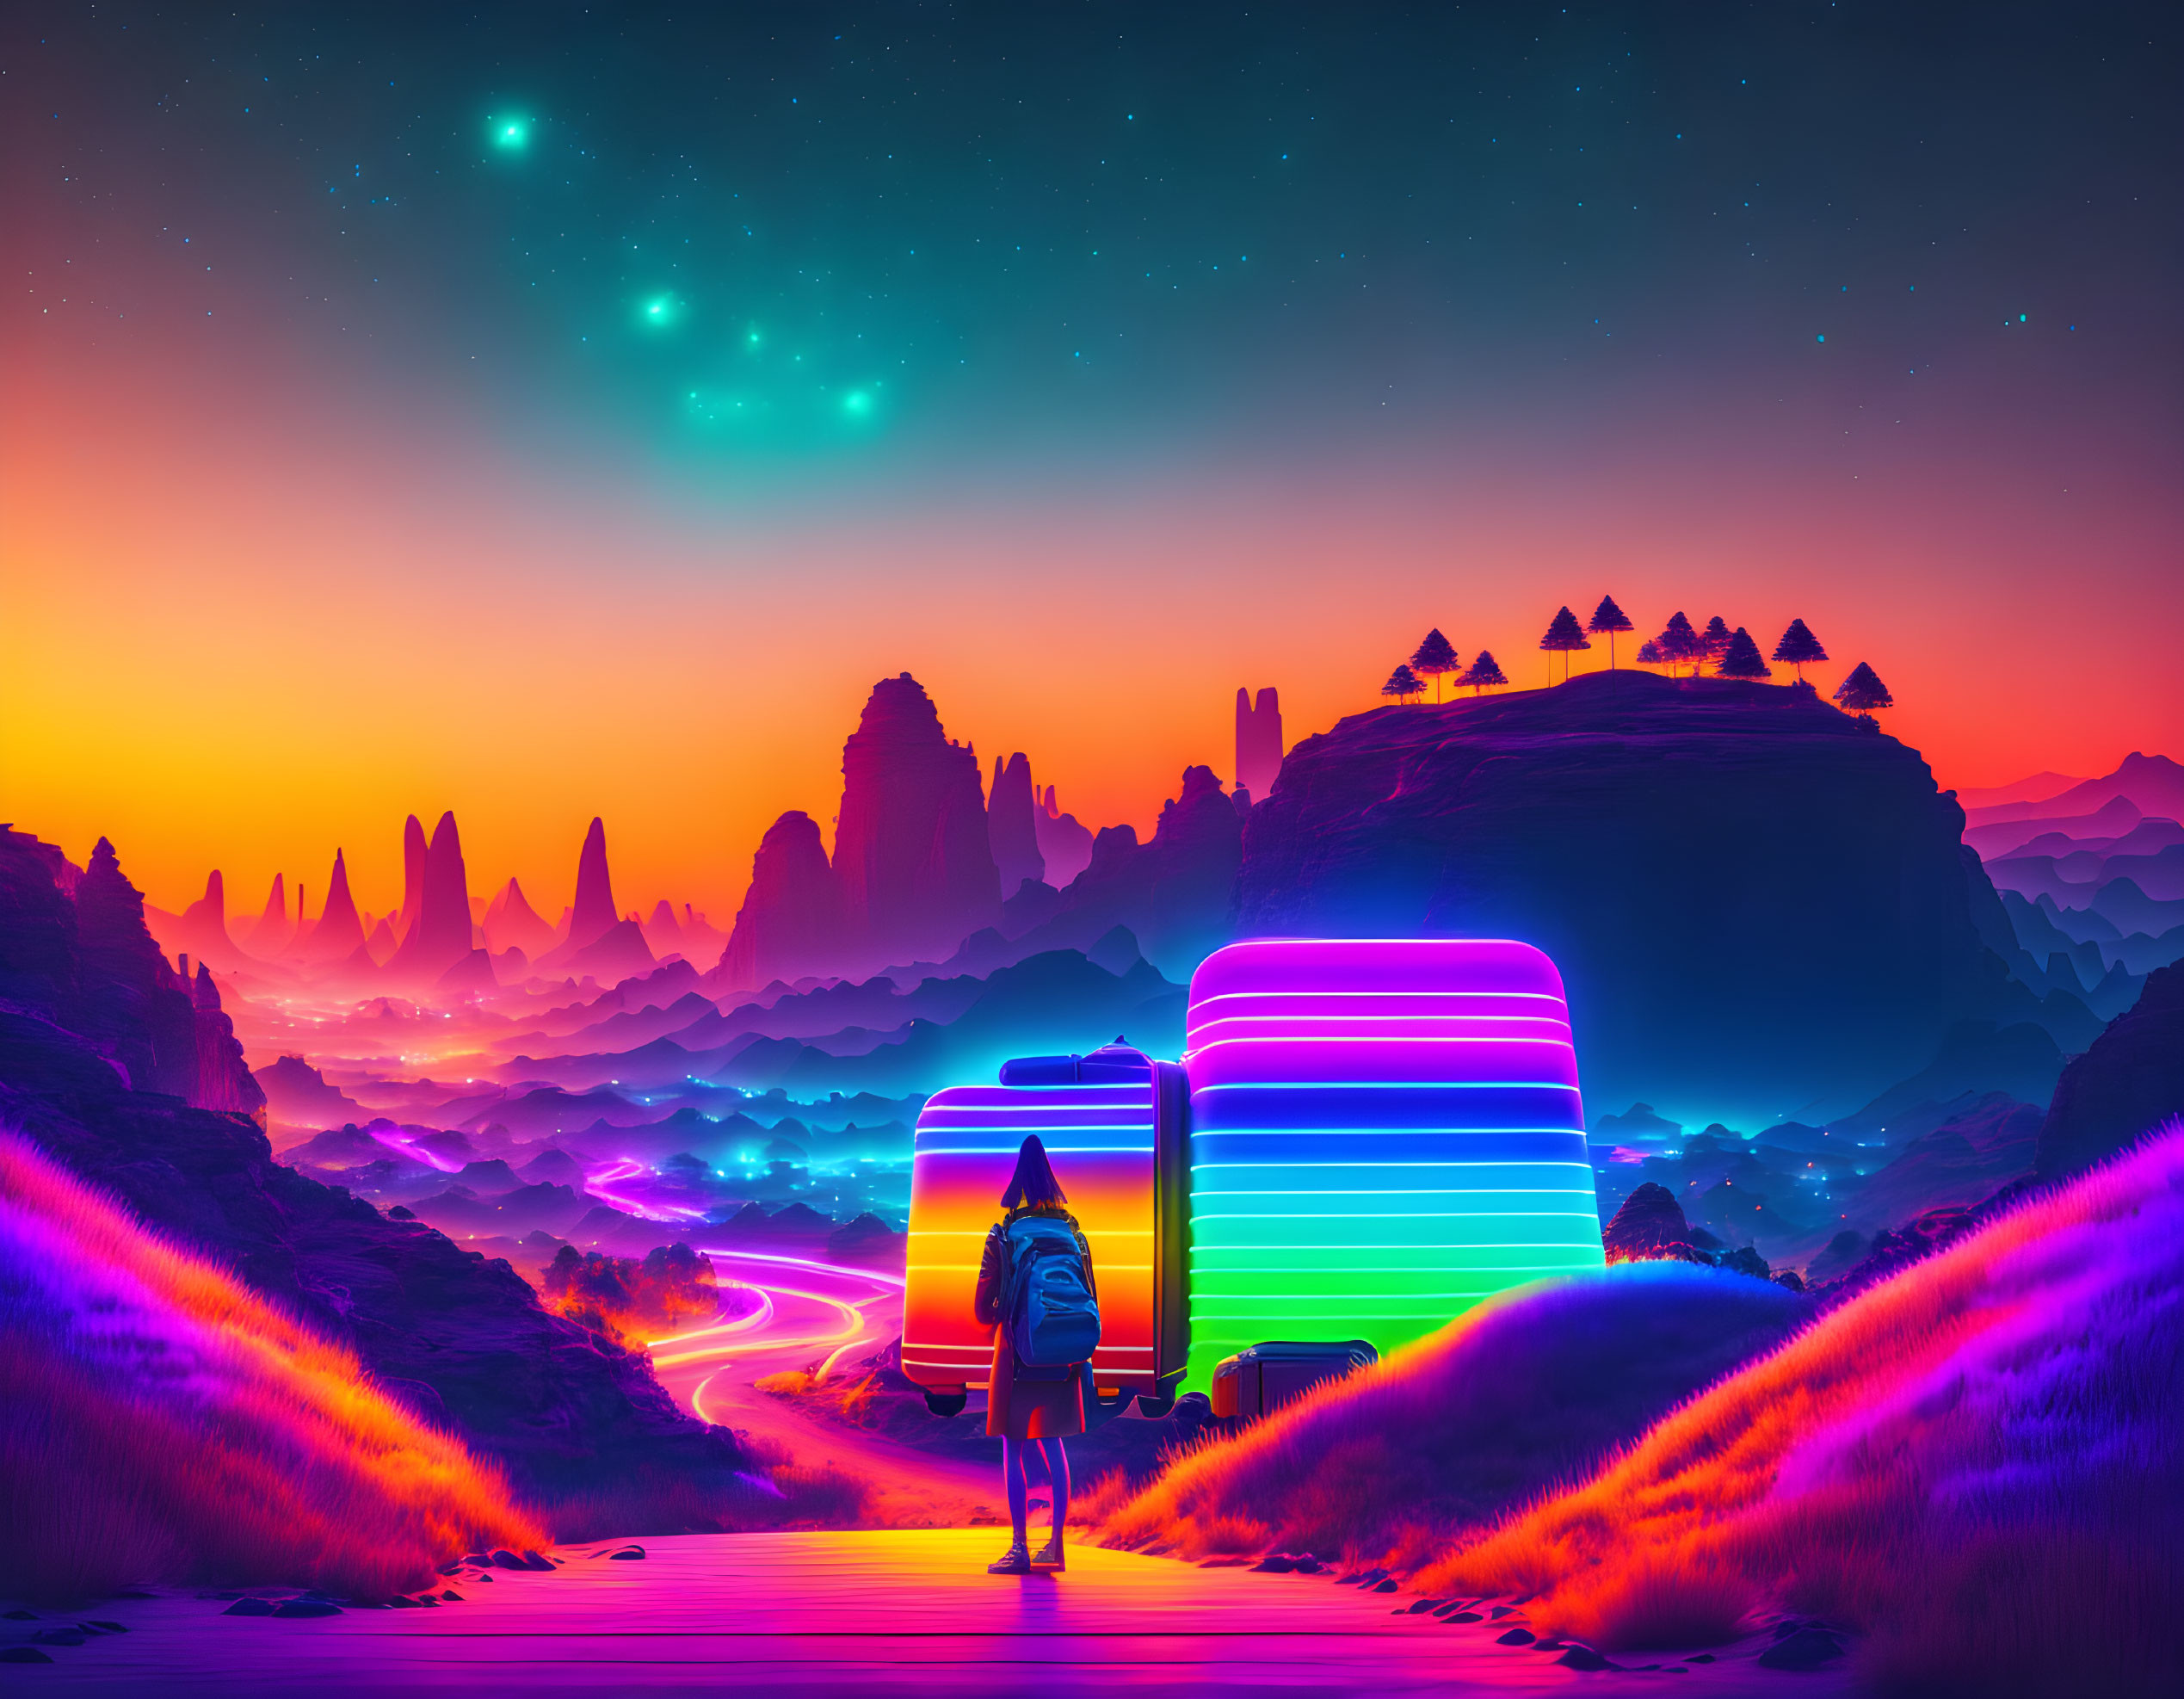 Person in futuristic alien landscape with vibrant colors and starry sky